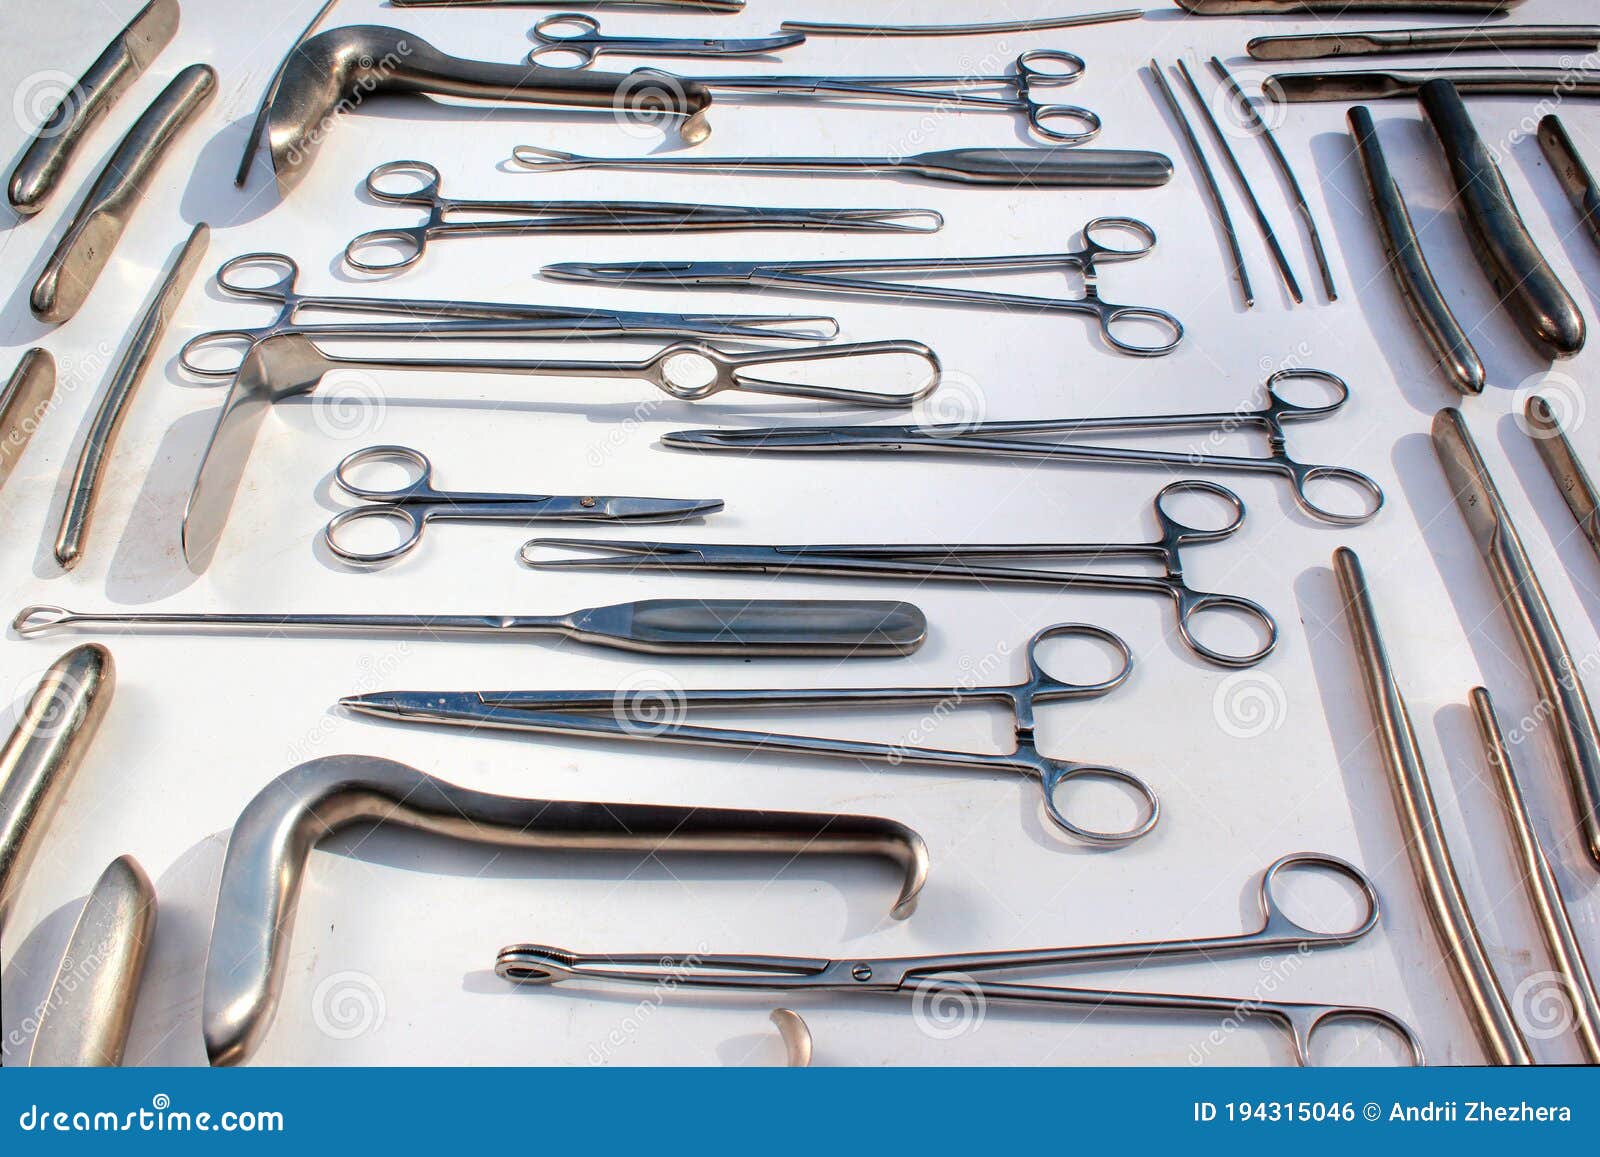 old metal obstetric, gynecological and urological instruments